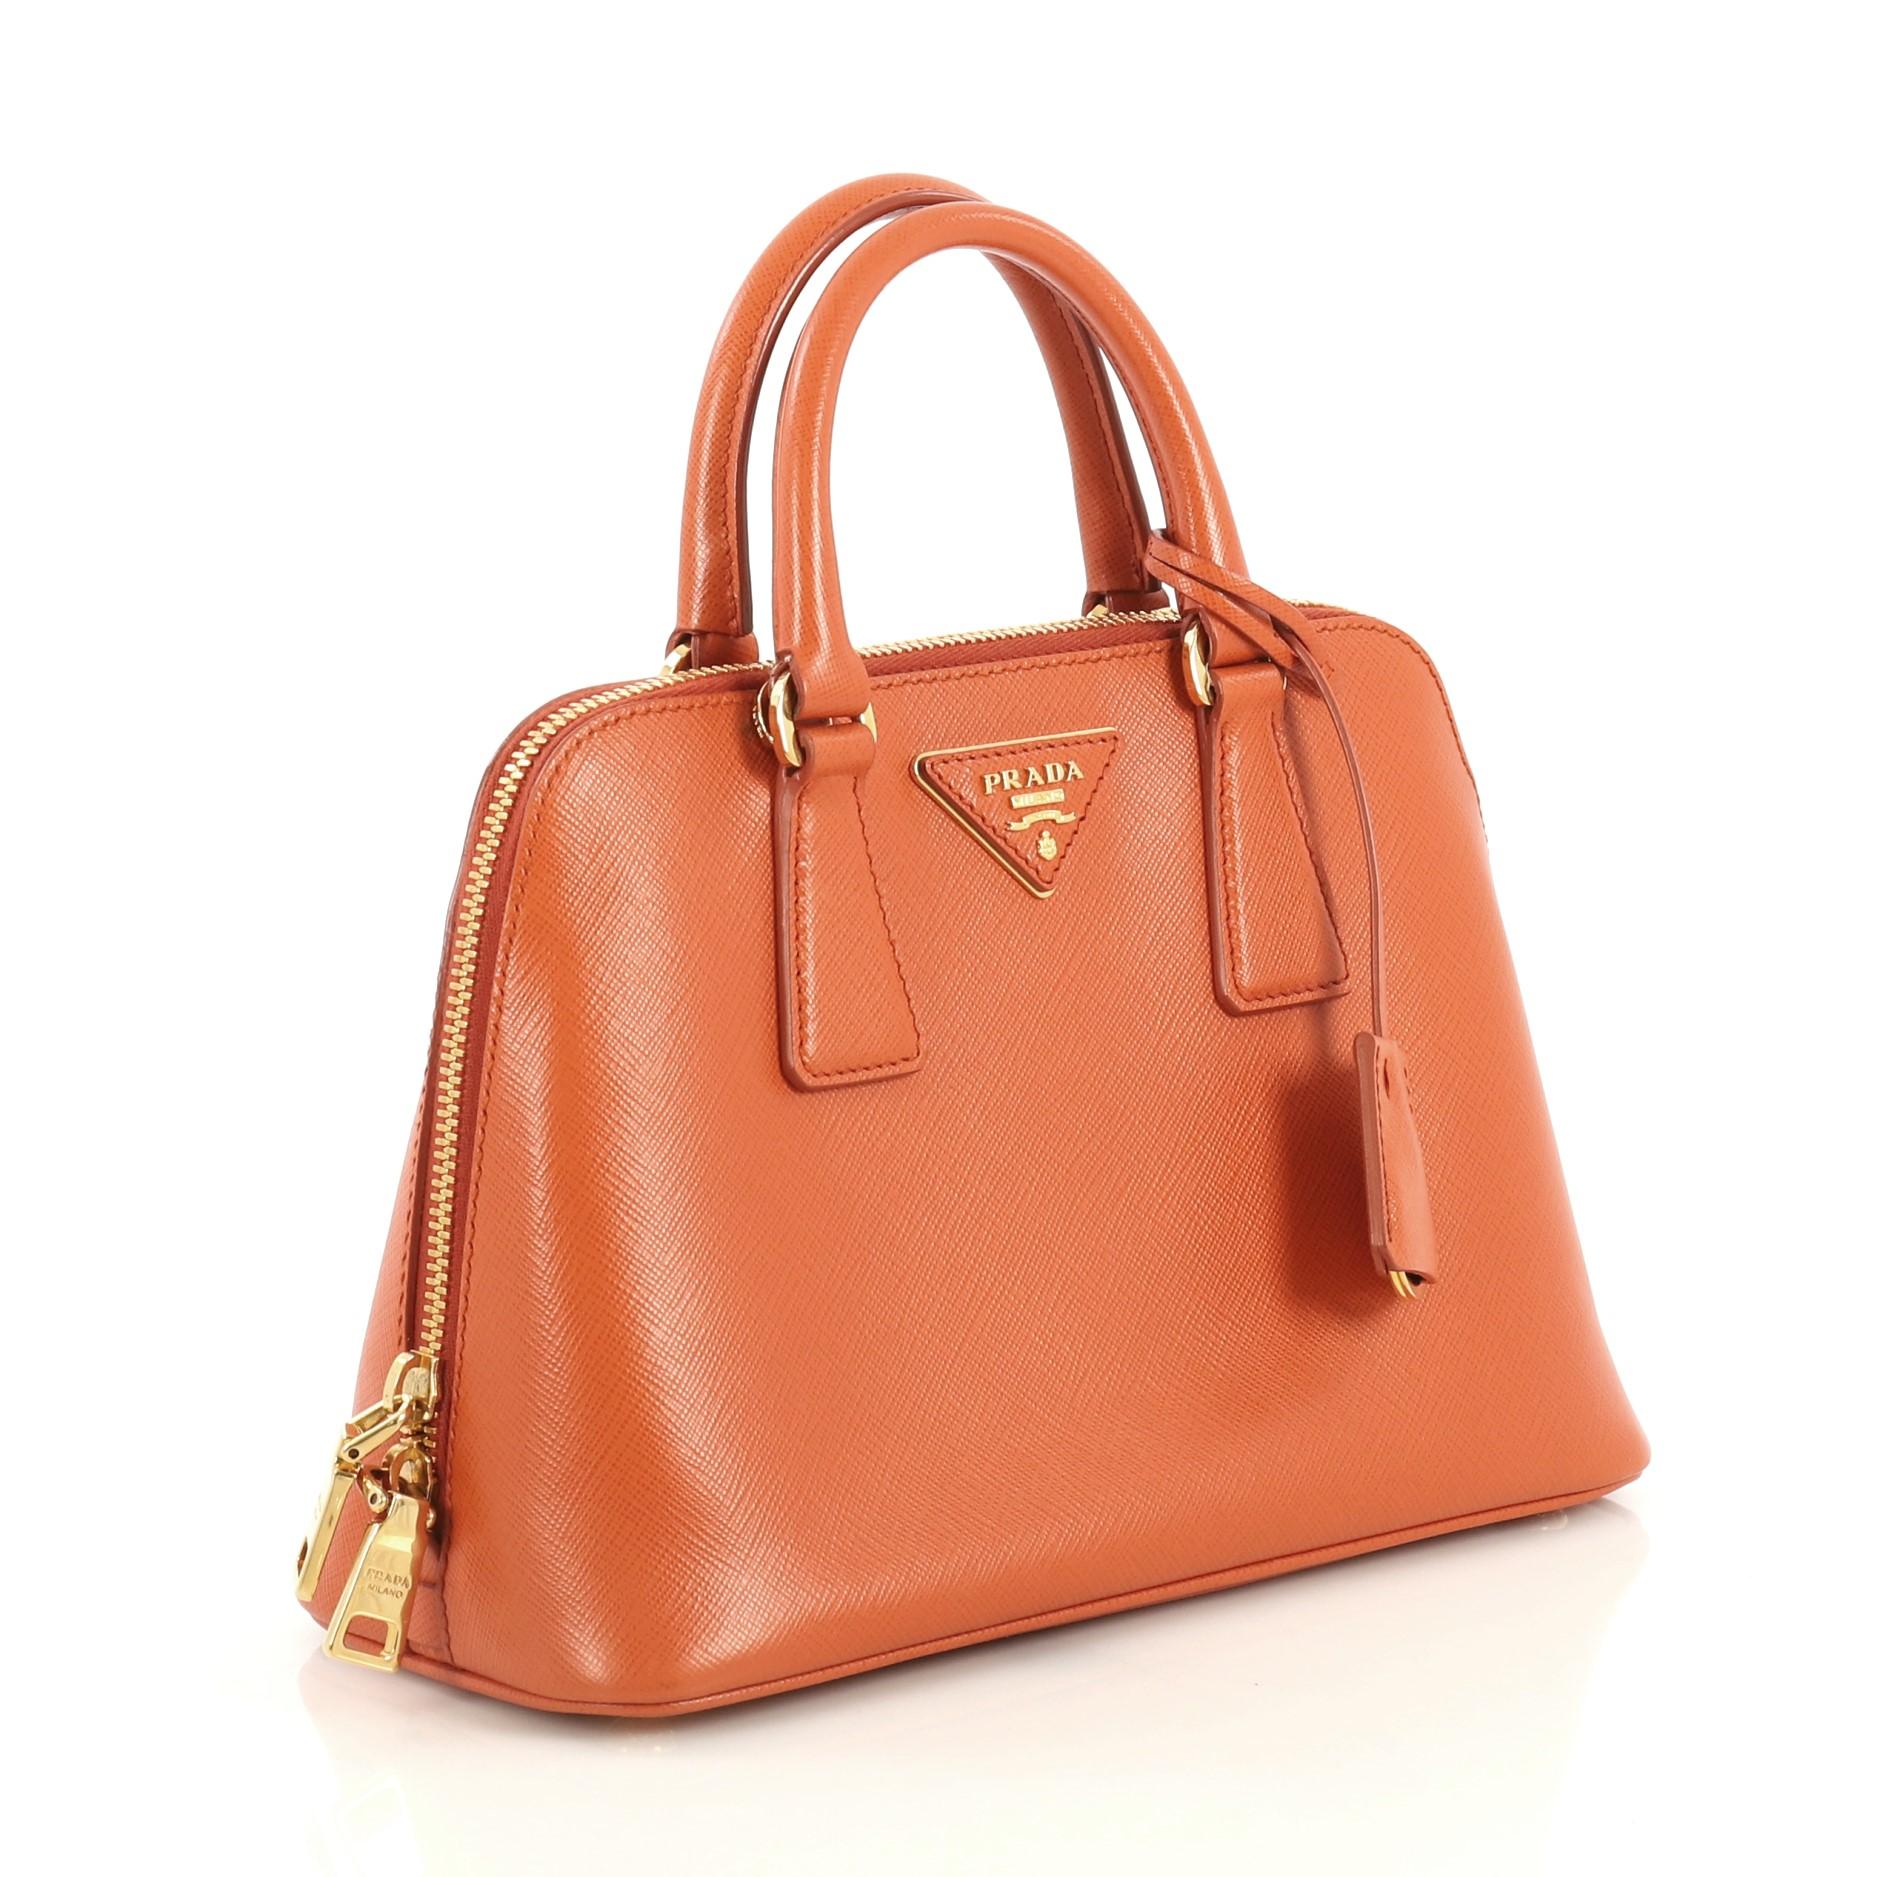 This Prada Promenade Bag Saffiano Leather Small, crafted from orange saffiano leather, features dual rolled handles, triangle Prada logo, and gold-tone hardware. Its two-way zip closure opens to an orange fabric interior with a center zip